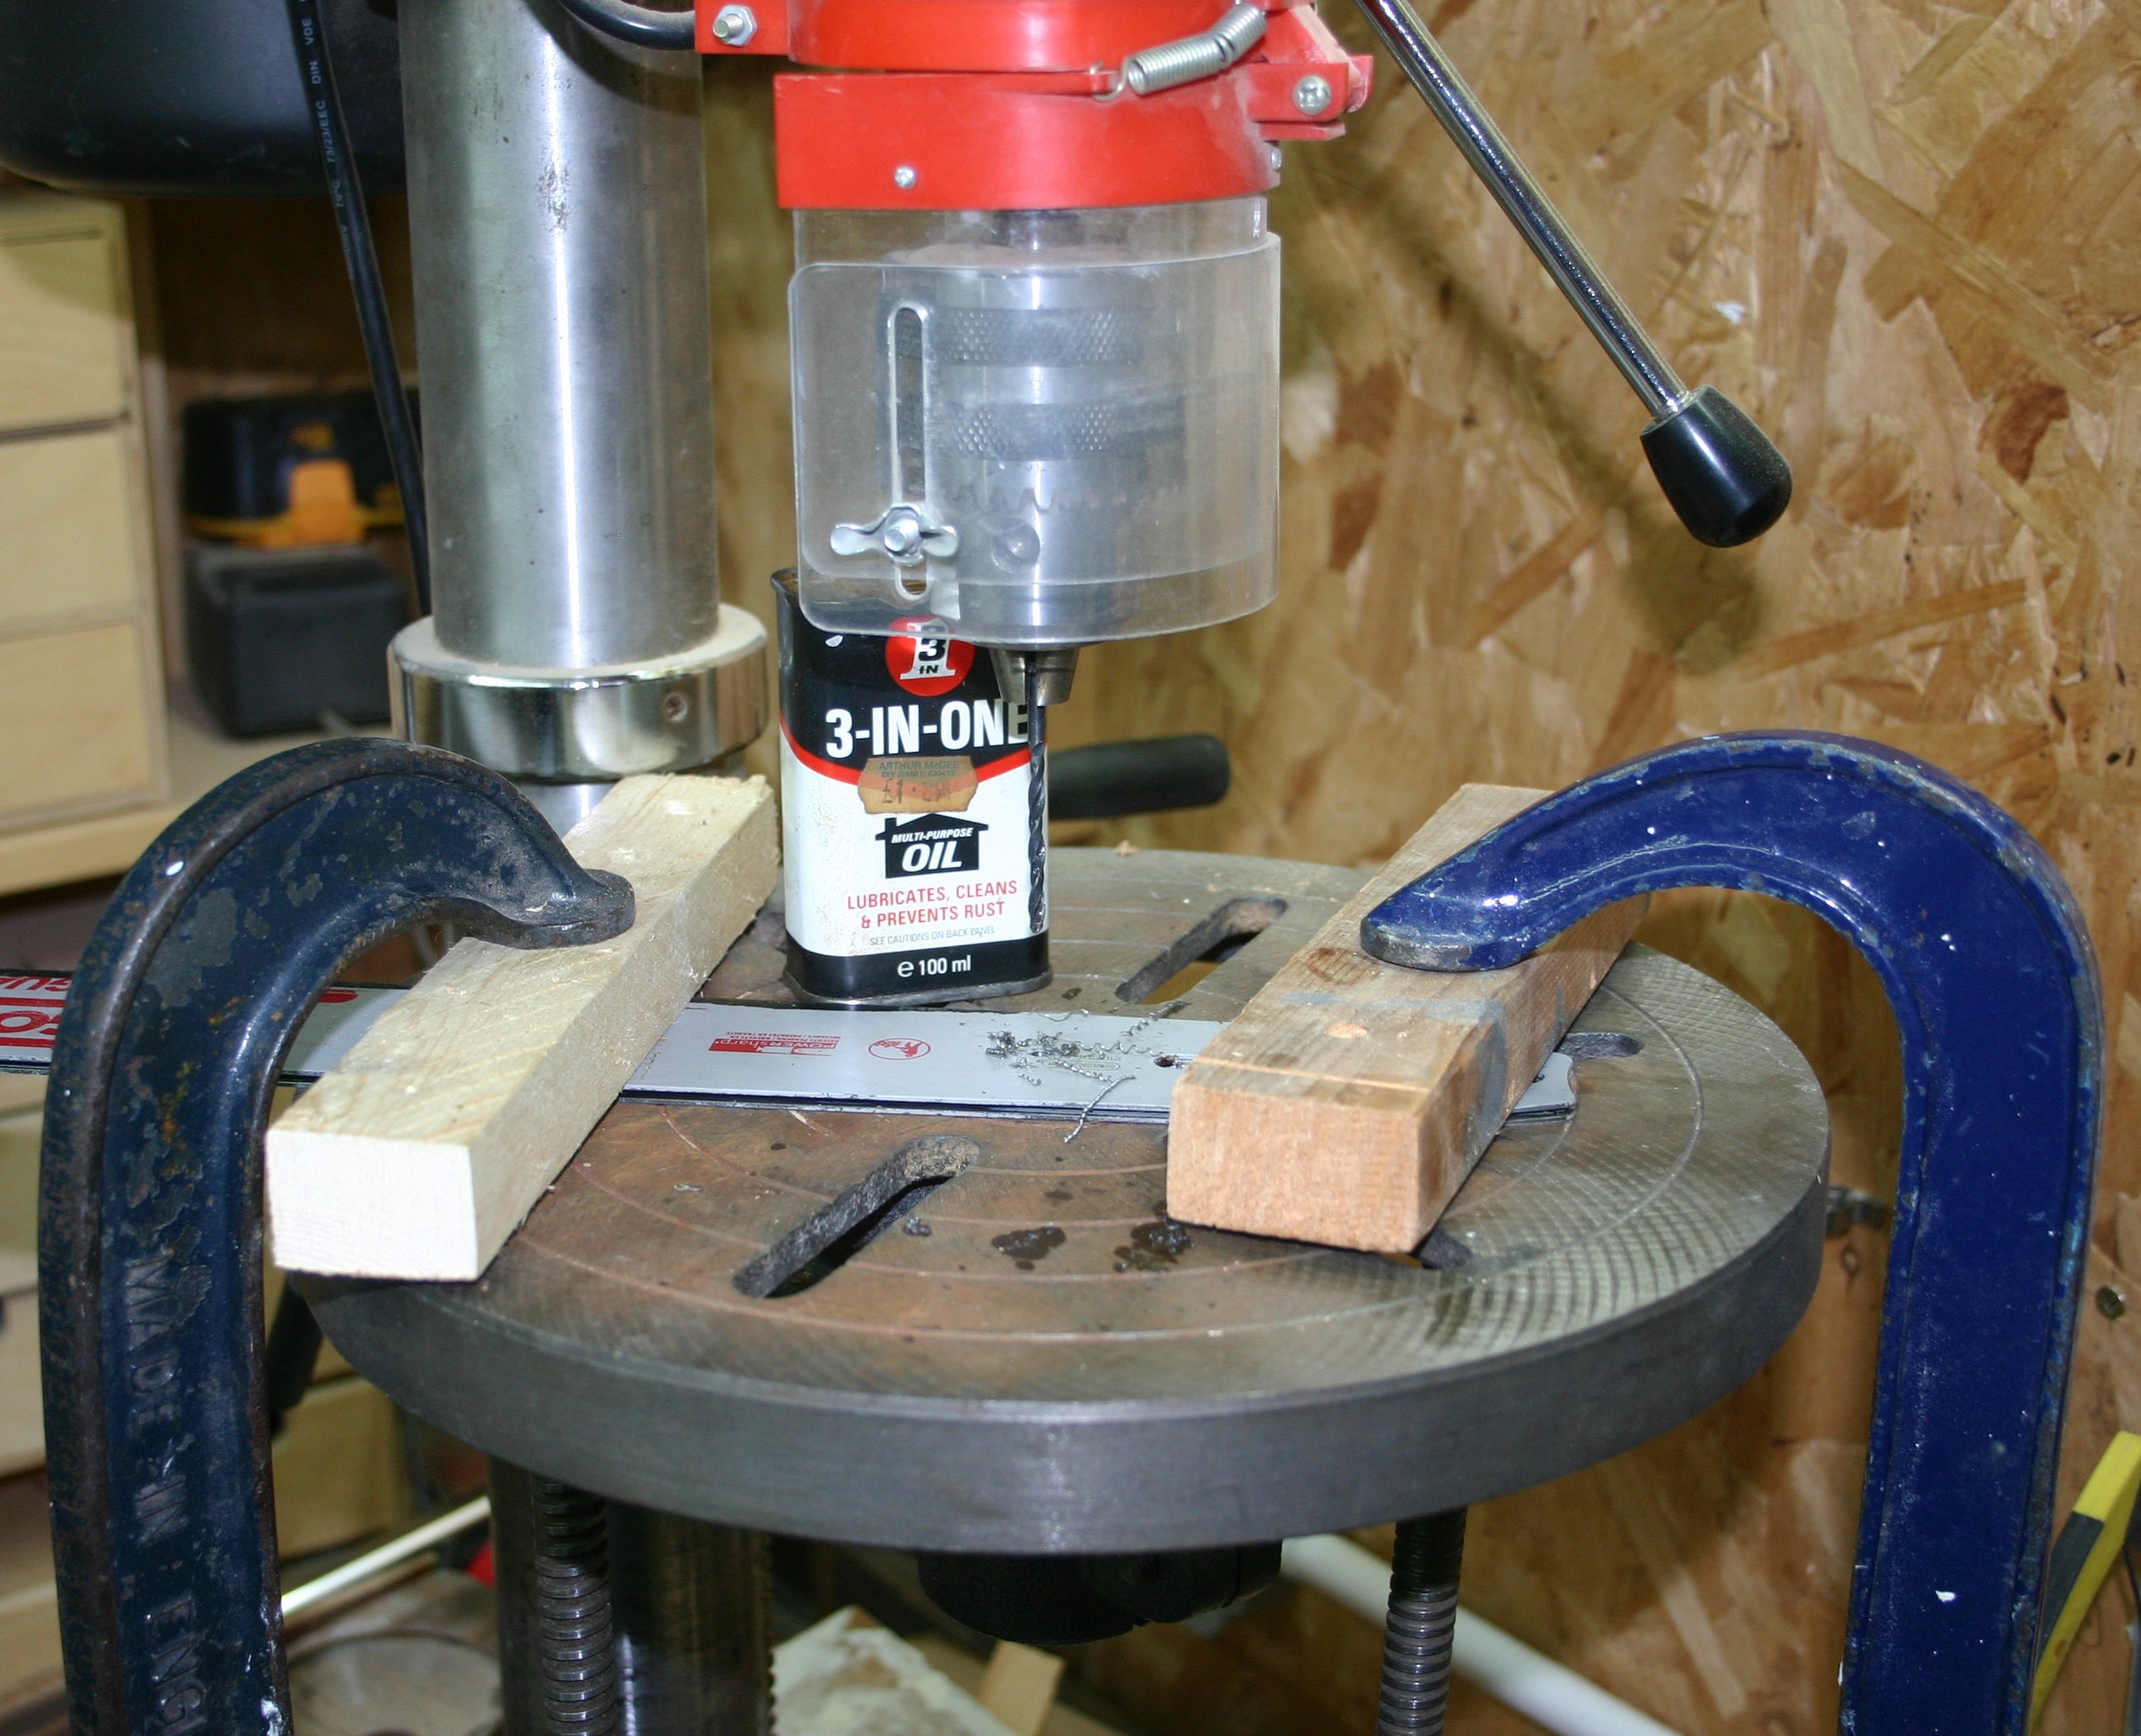 Drilling a rear bolting hole in the CS1500 chainsaw guide bar.